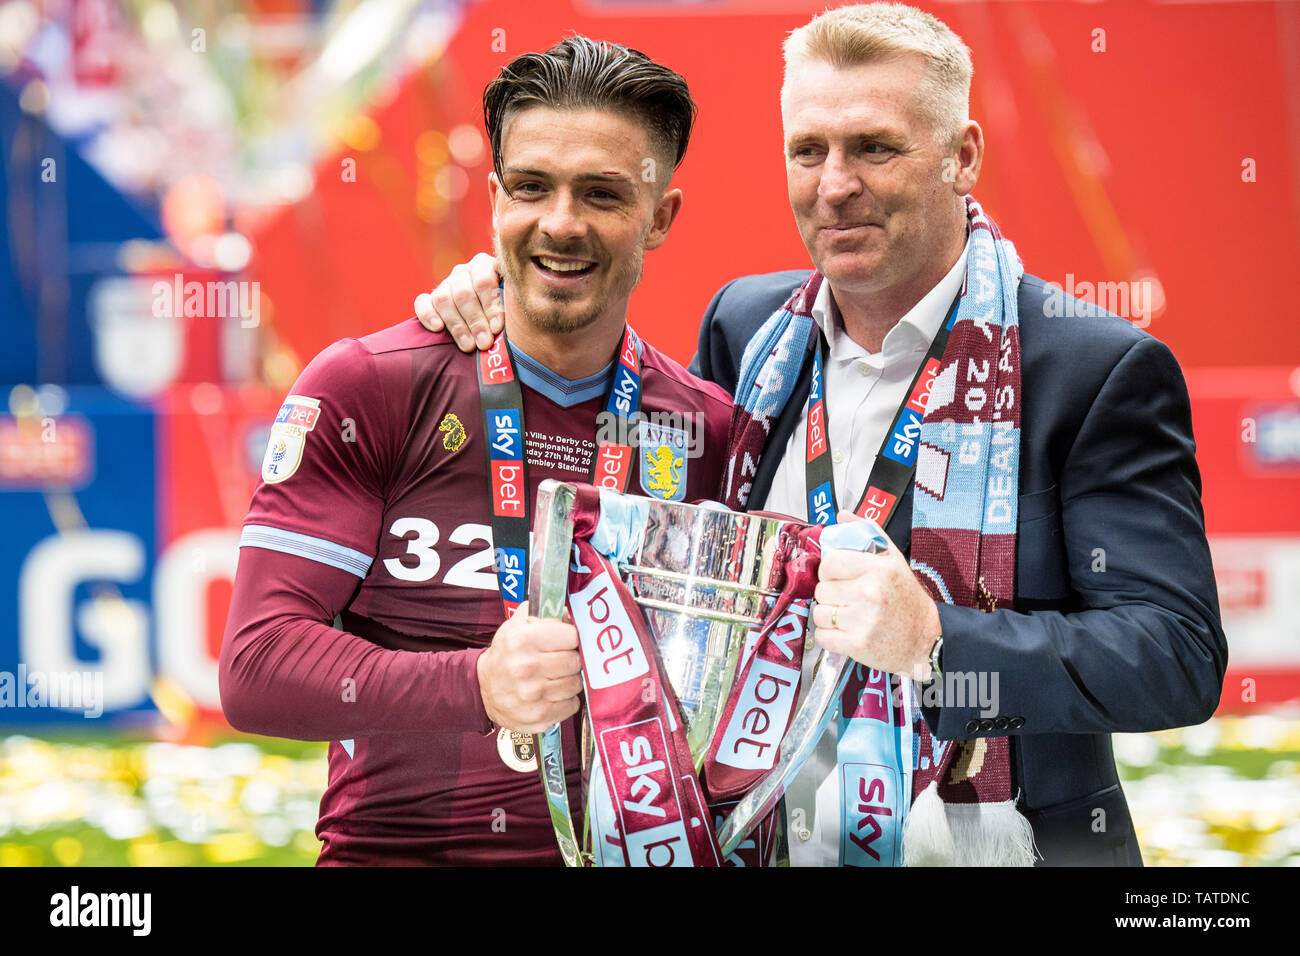 LONDON, ENGLAND - MAY 27: Jack Grealish and manager Dean Smith of Aston Villa lifts the trophy during the Sky Bet Championship Play-off Final match between Aston Villa and Derby County at Wembley Stadium on May 27, 2019 in London, United Kingdom. (Photo by Sebastian Frej/MB Media) Stock Photo